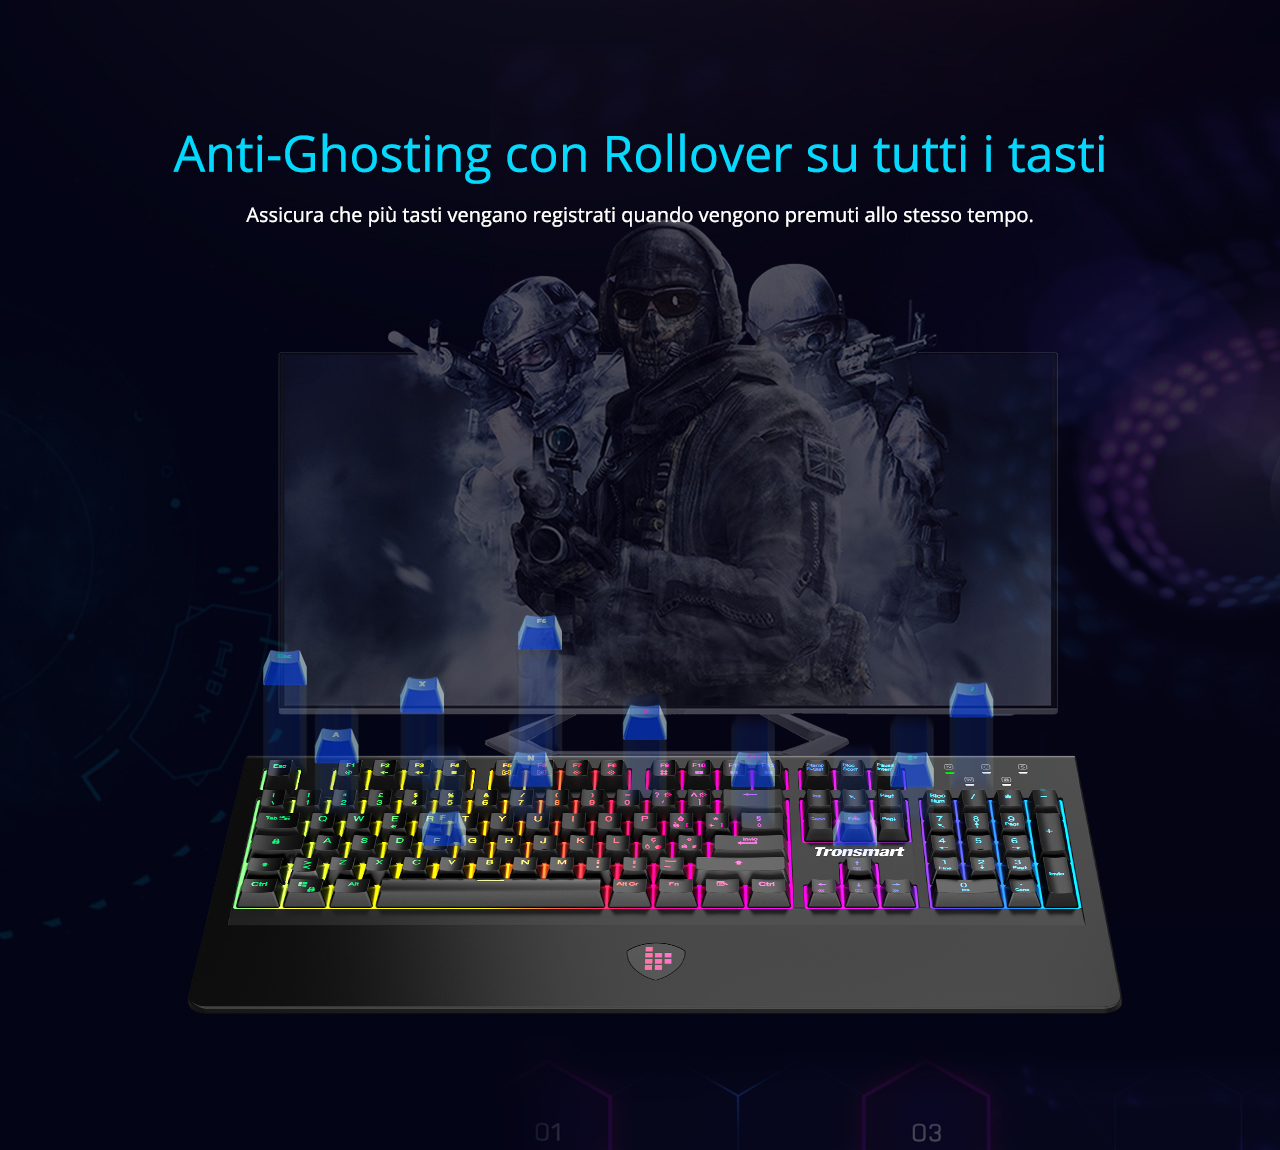 Tronsmart TK09R Mechanical Gaming Keyboard with RGB Backlght Macro Keys Blue Switches for Gamers - IT Layout